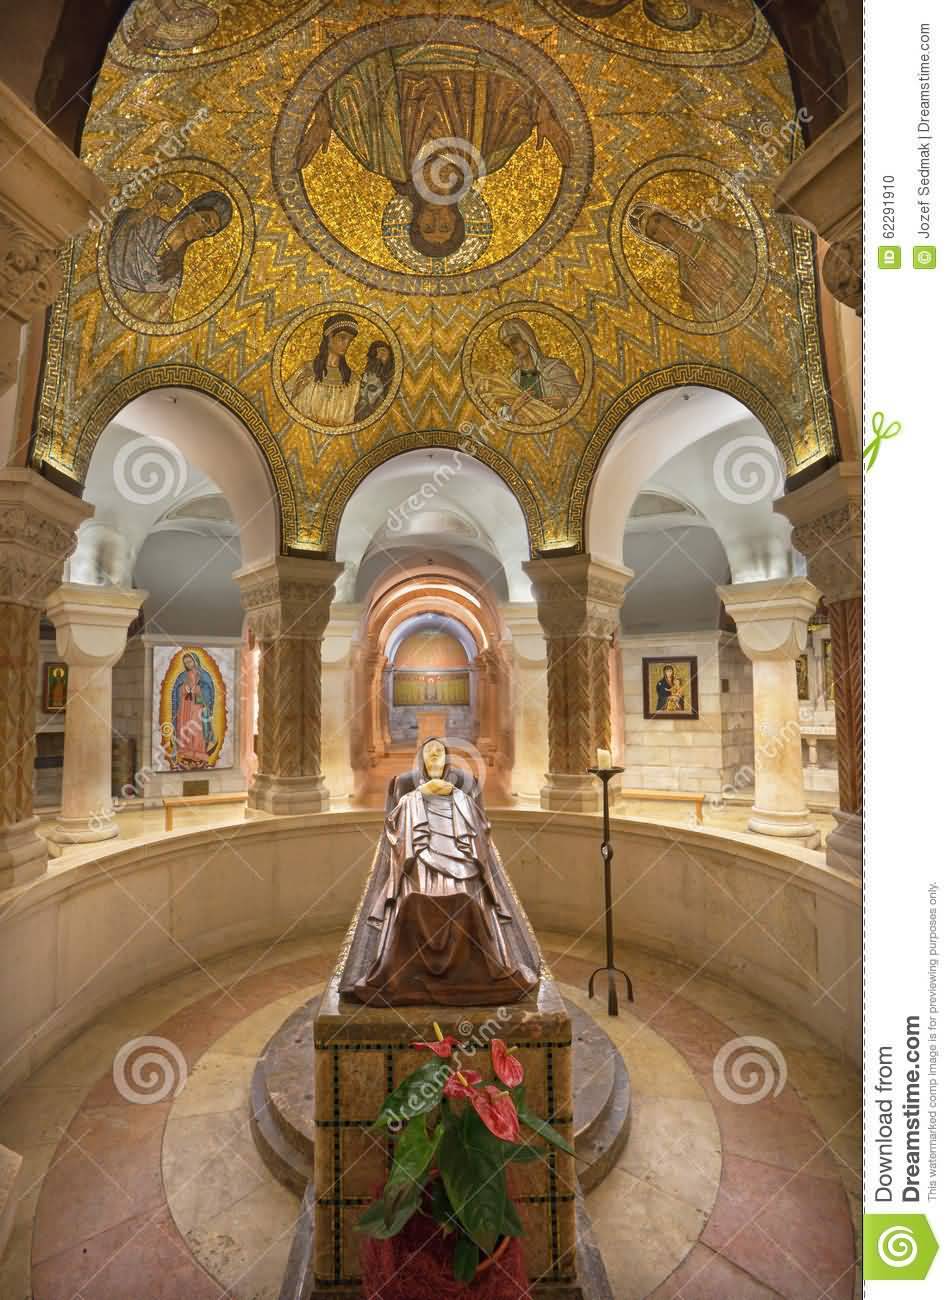 The Crypt Of Dormition Abbey With Statue Of Death Virgin Mary